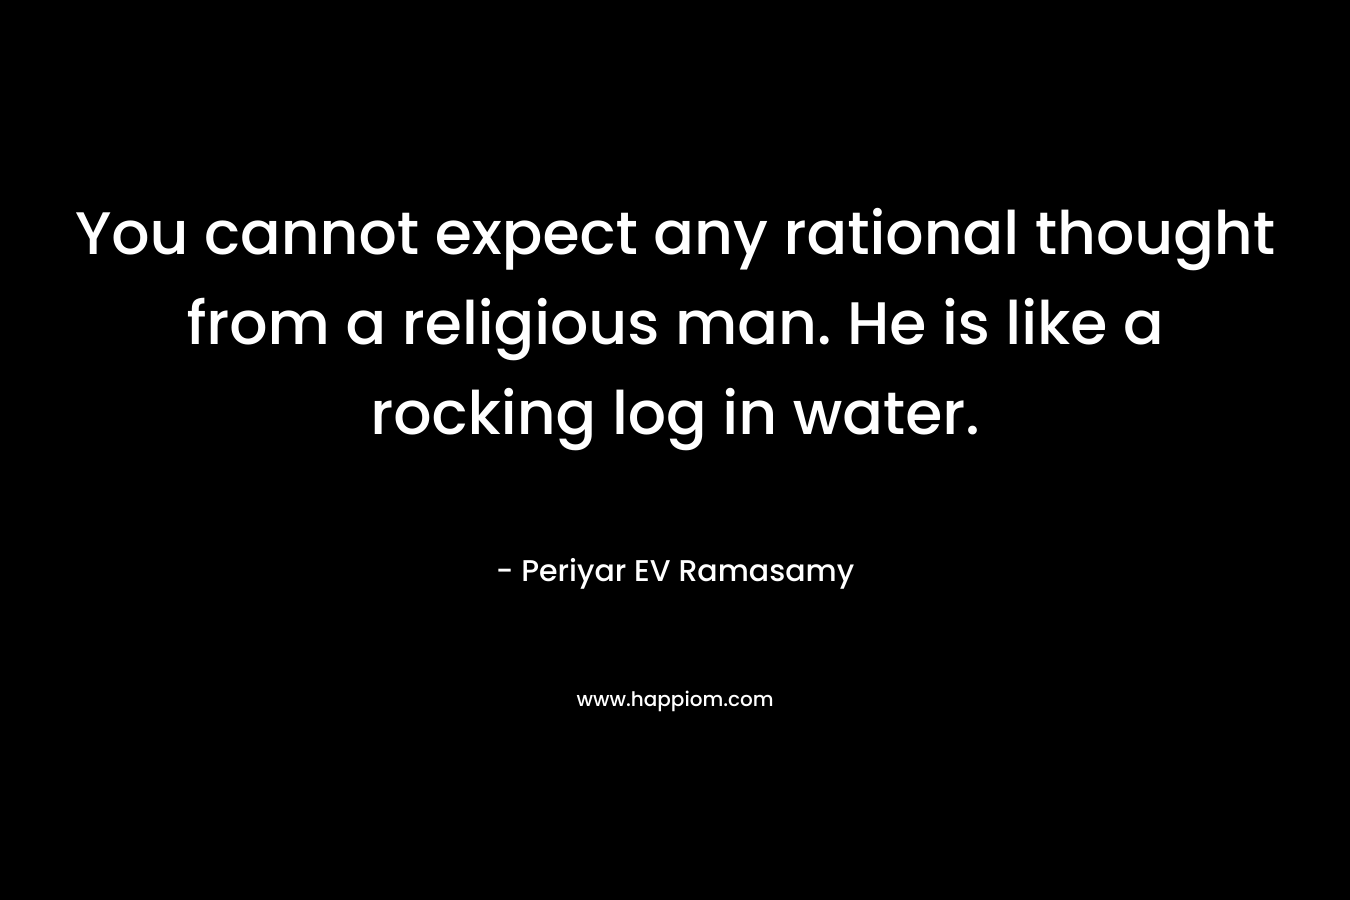 You cannot expect any rational thought from a religious man. He is like a rocking log in water. – Periyar EV Ramasamy